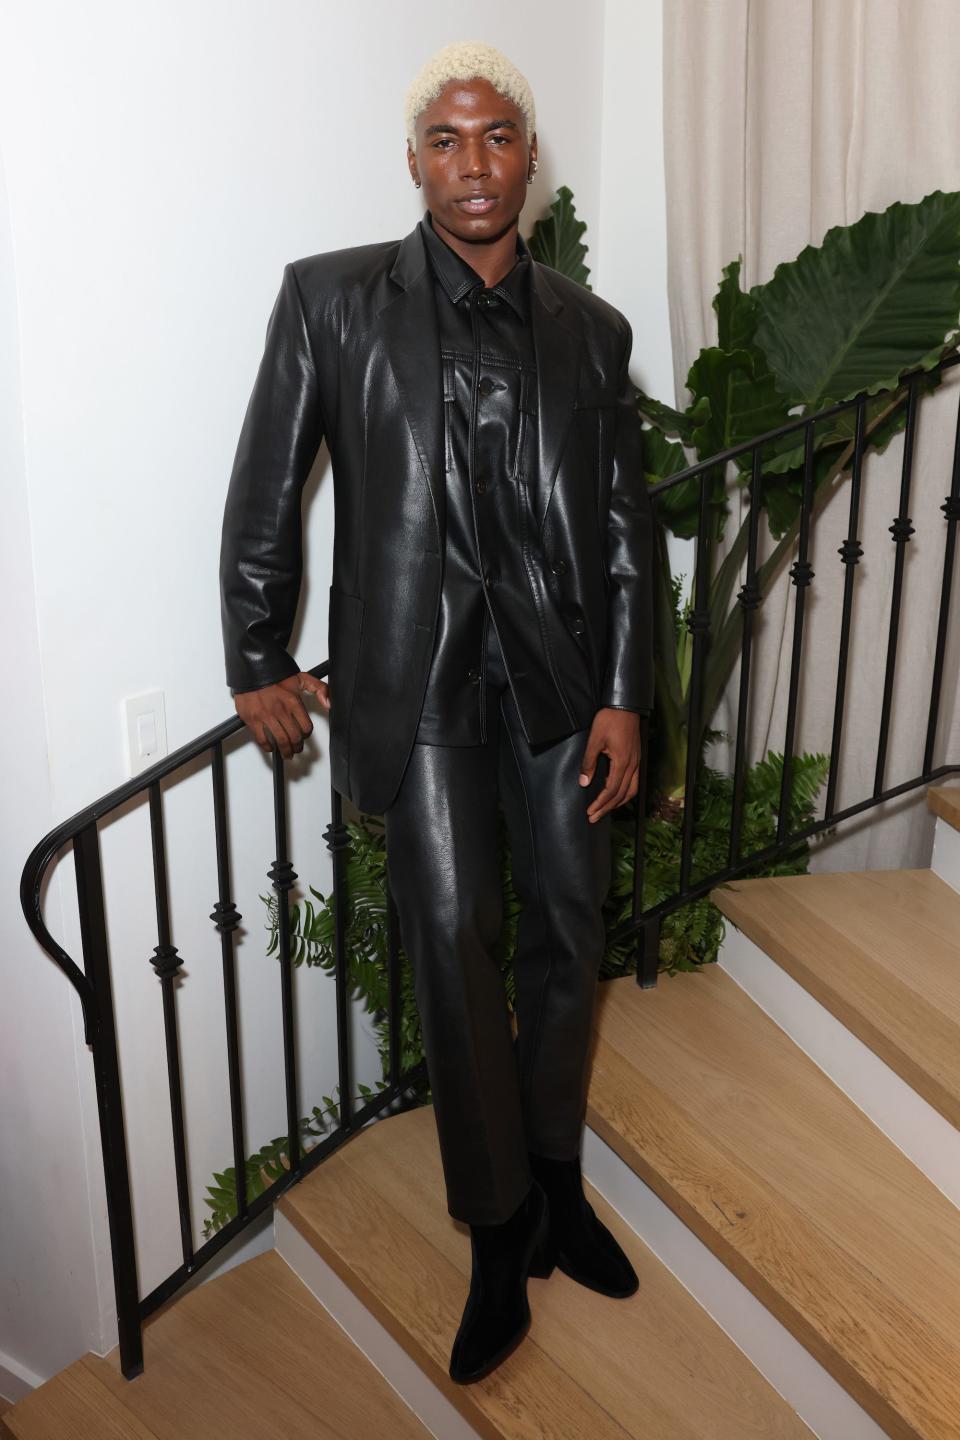 Deon Hinton poses in an all black, leather look on a pair of stairs.